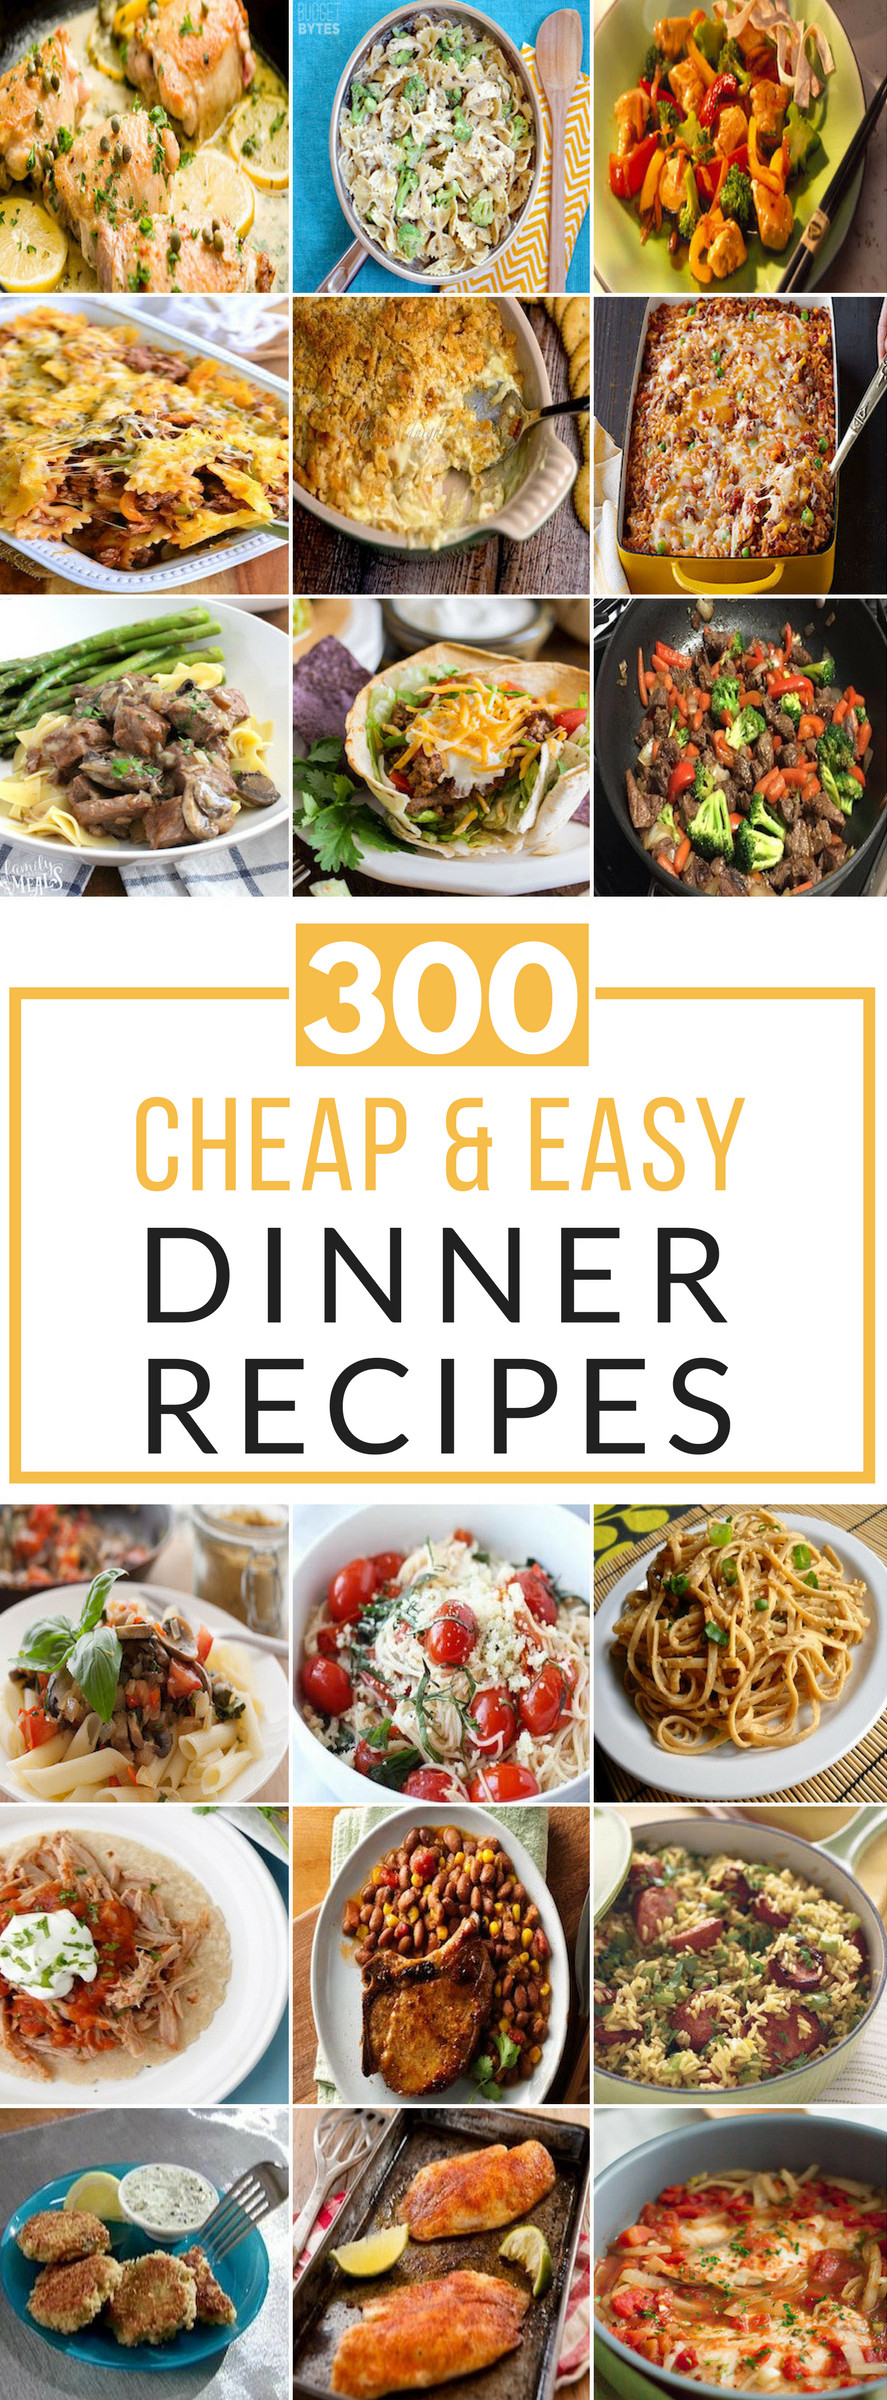 Cheap Quick Dinners
 300 Cheap and Easy Dinner Recipes Prudent Penny Pincher